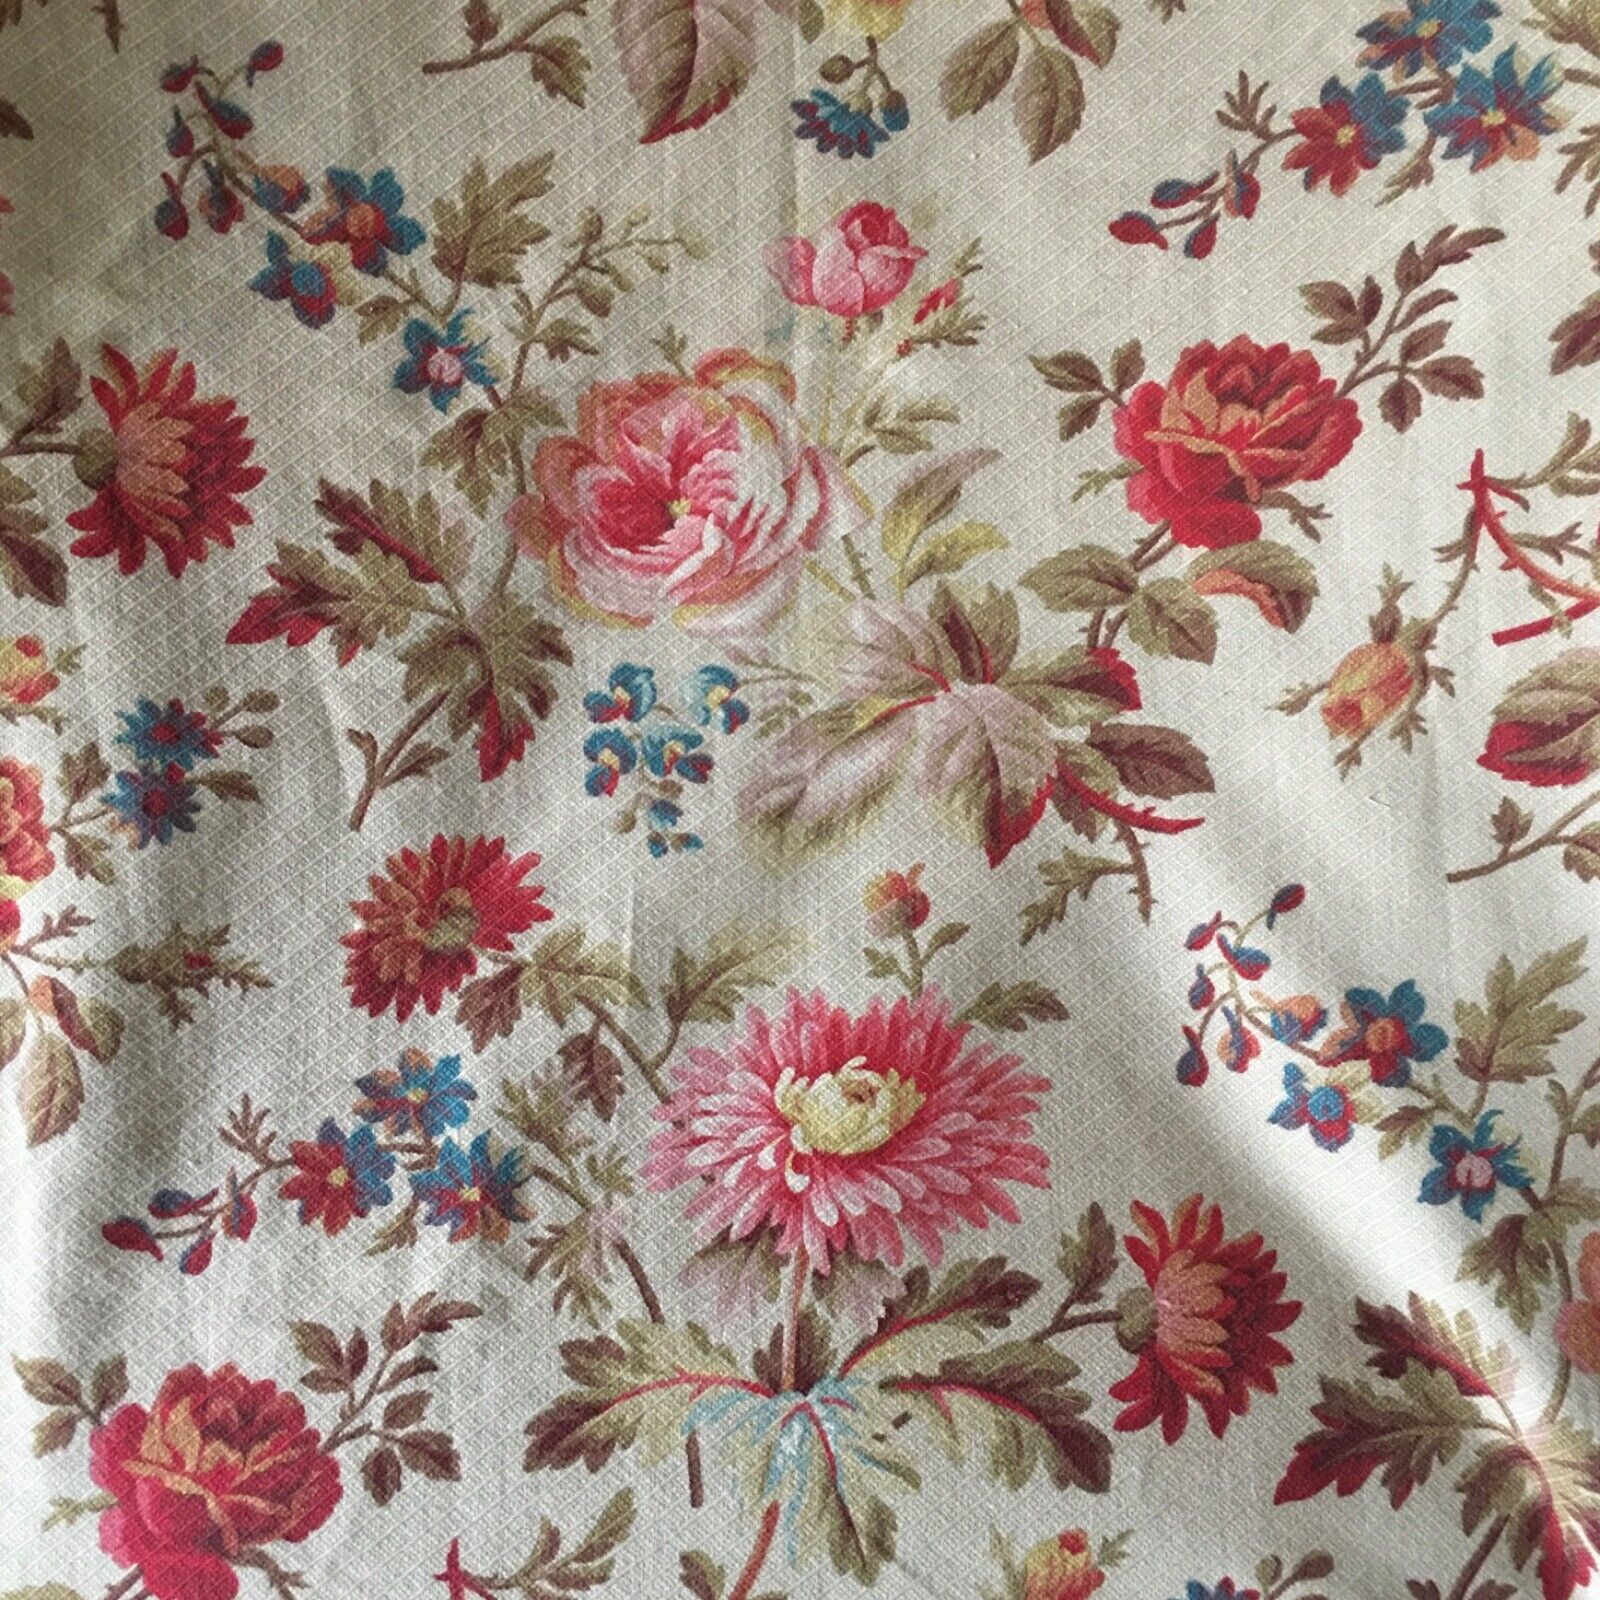 Antique French Floral Roses Cotton Fabric ~ Red Pink Blue Yellow Green